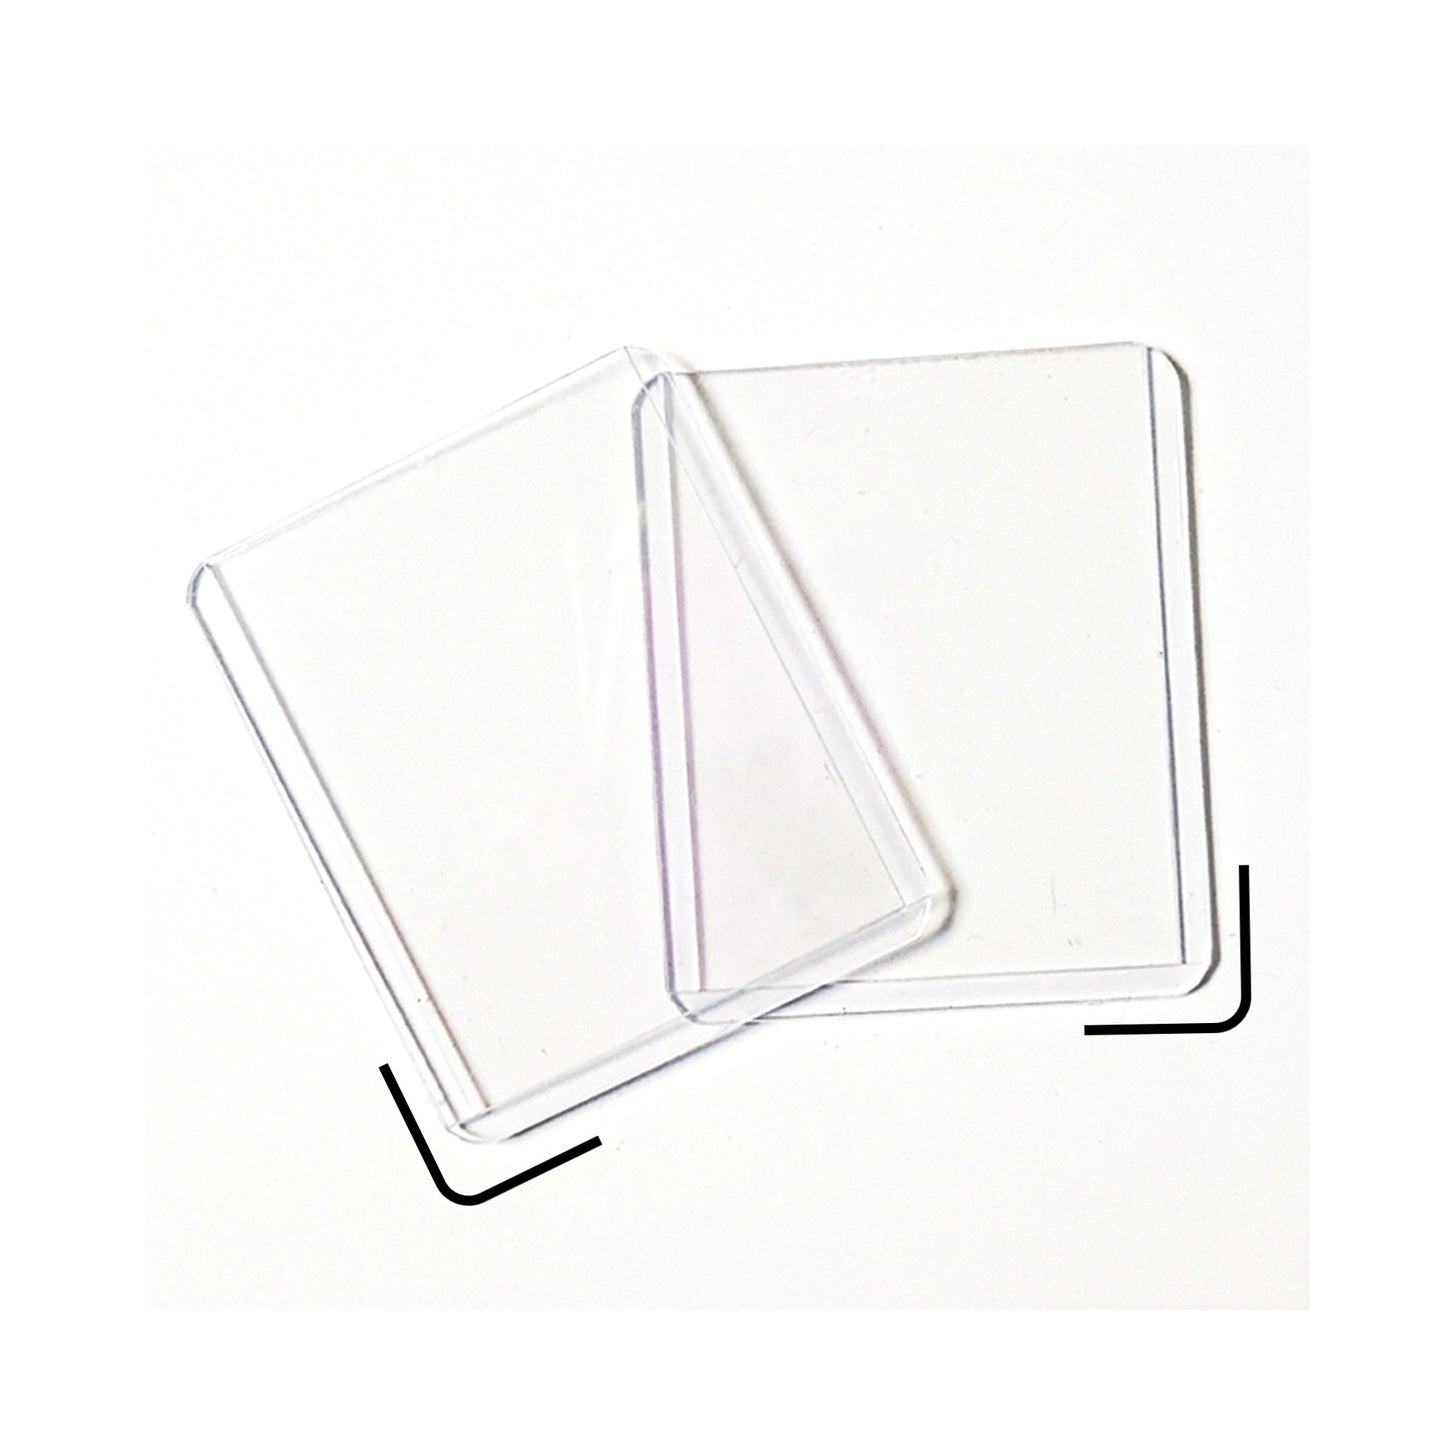 25pcs Mini Size Top Loaders for Passport Picture Size 2 X 1.7 inch